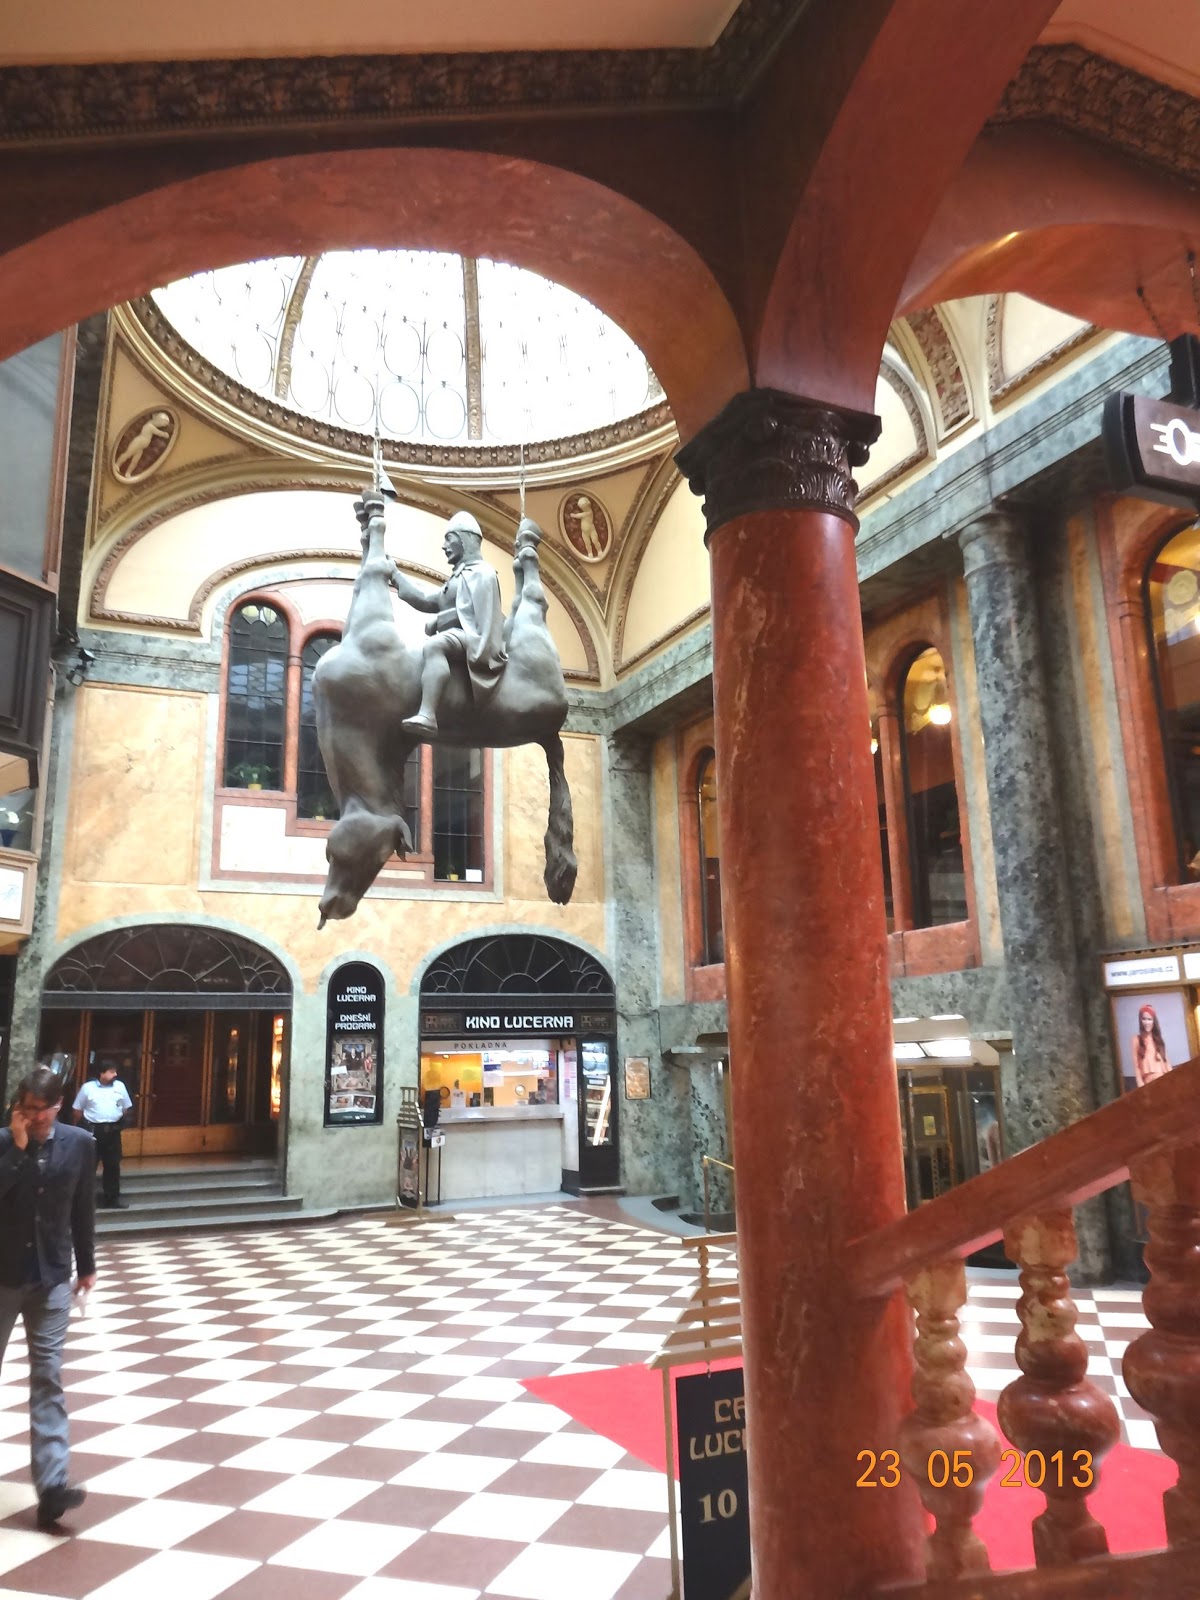 The central hall in Lucerna passage